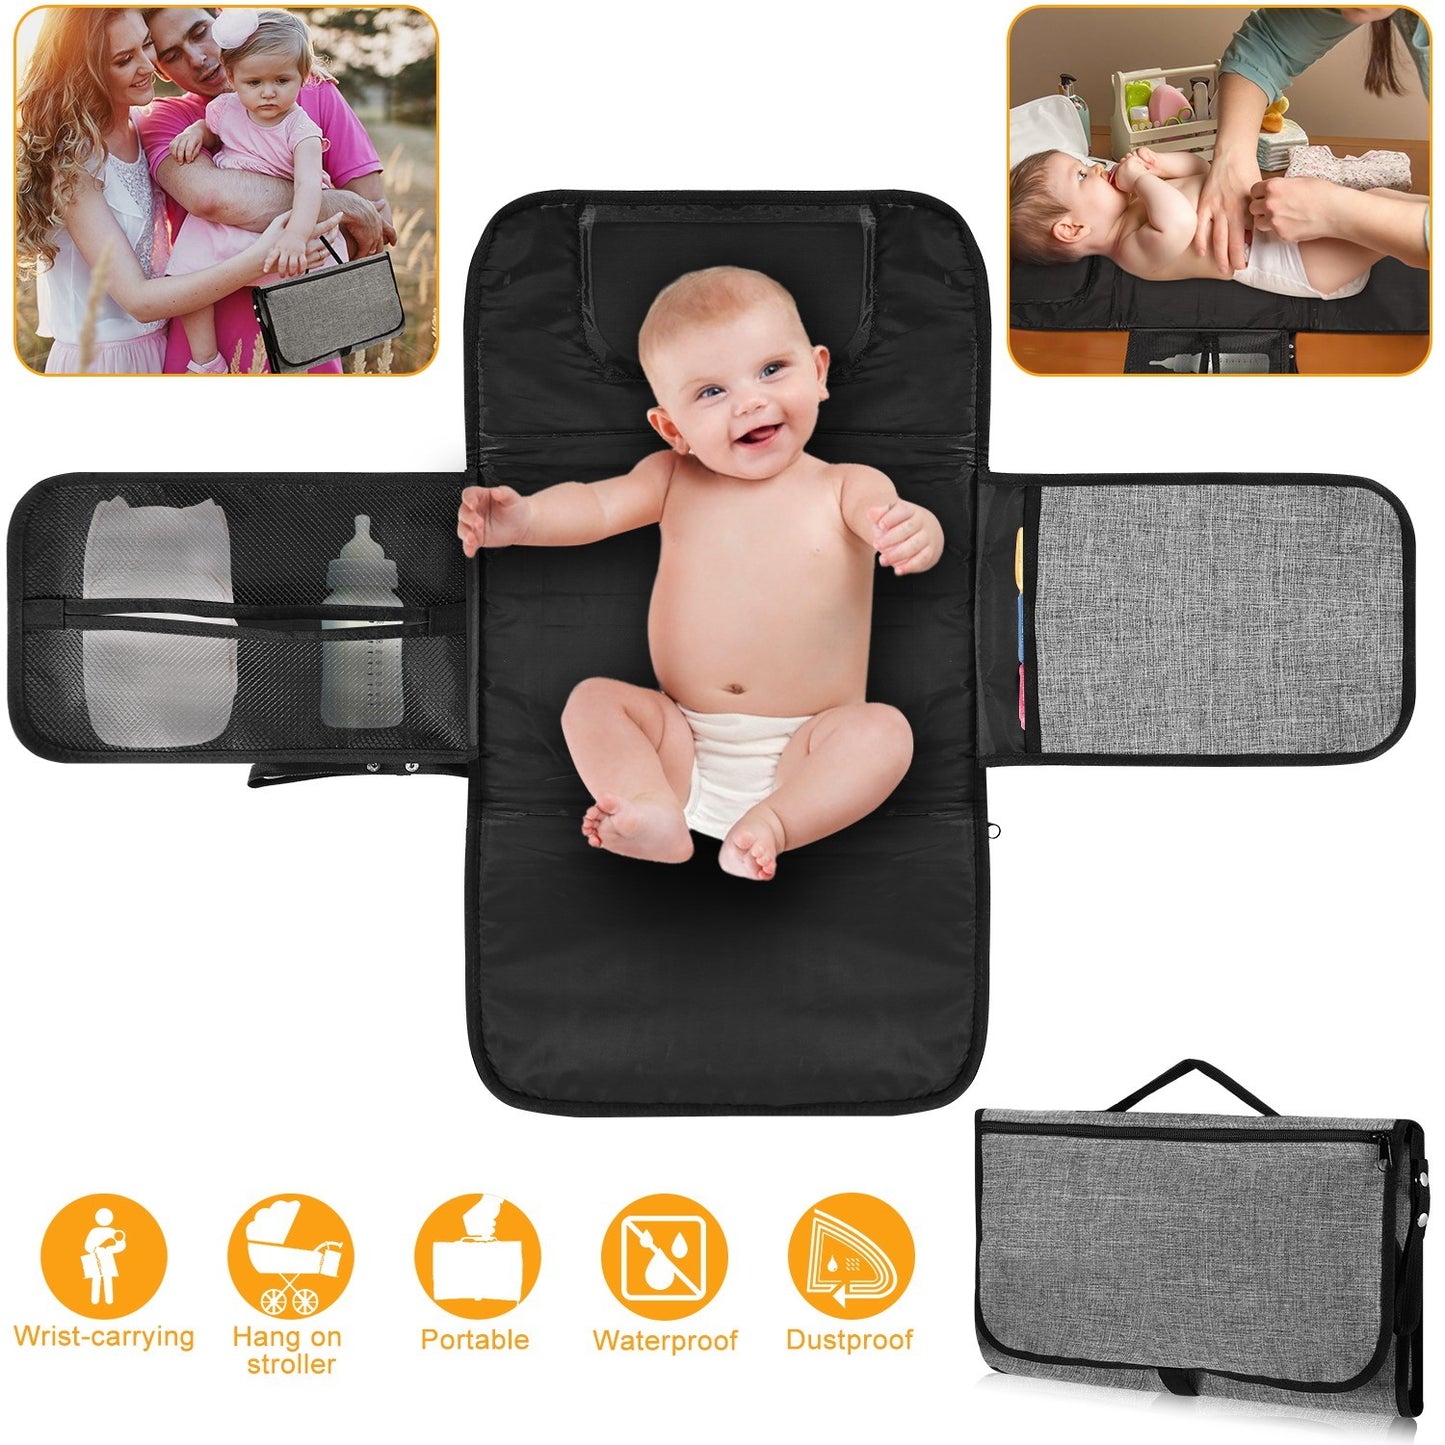 Portable Changing Pad Foldable Diaper Changing Pad Kit Waterproof Wipeable Changing Mat